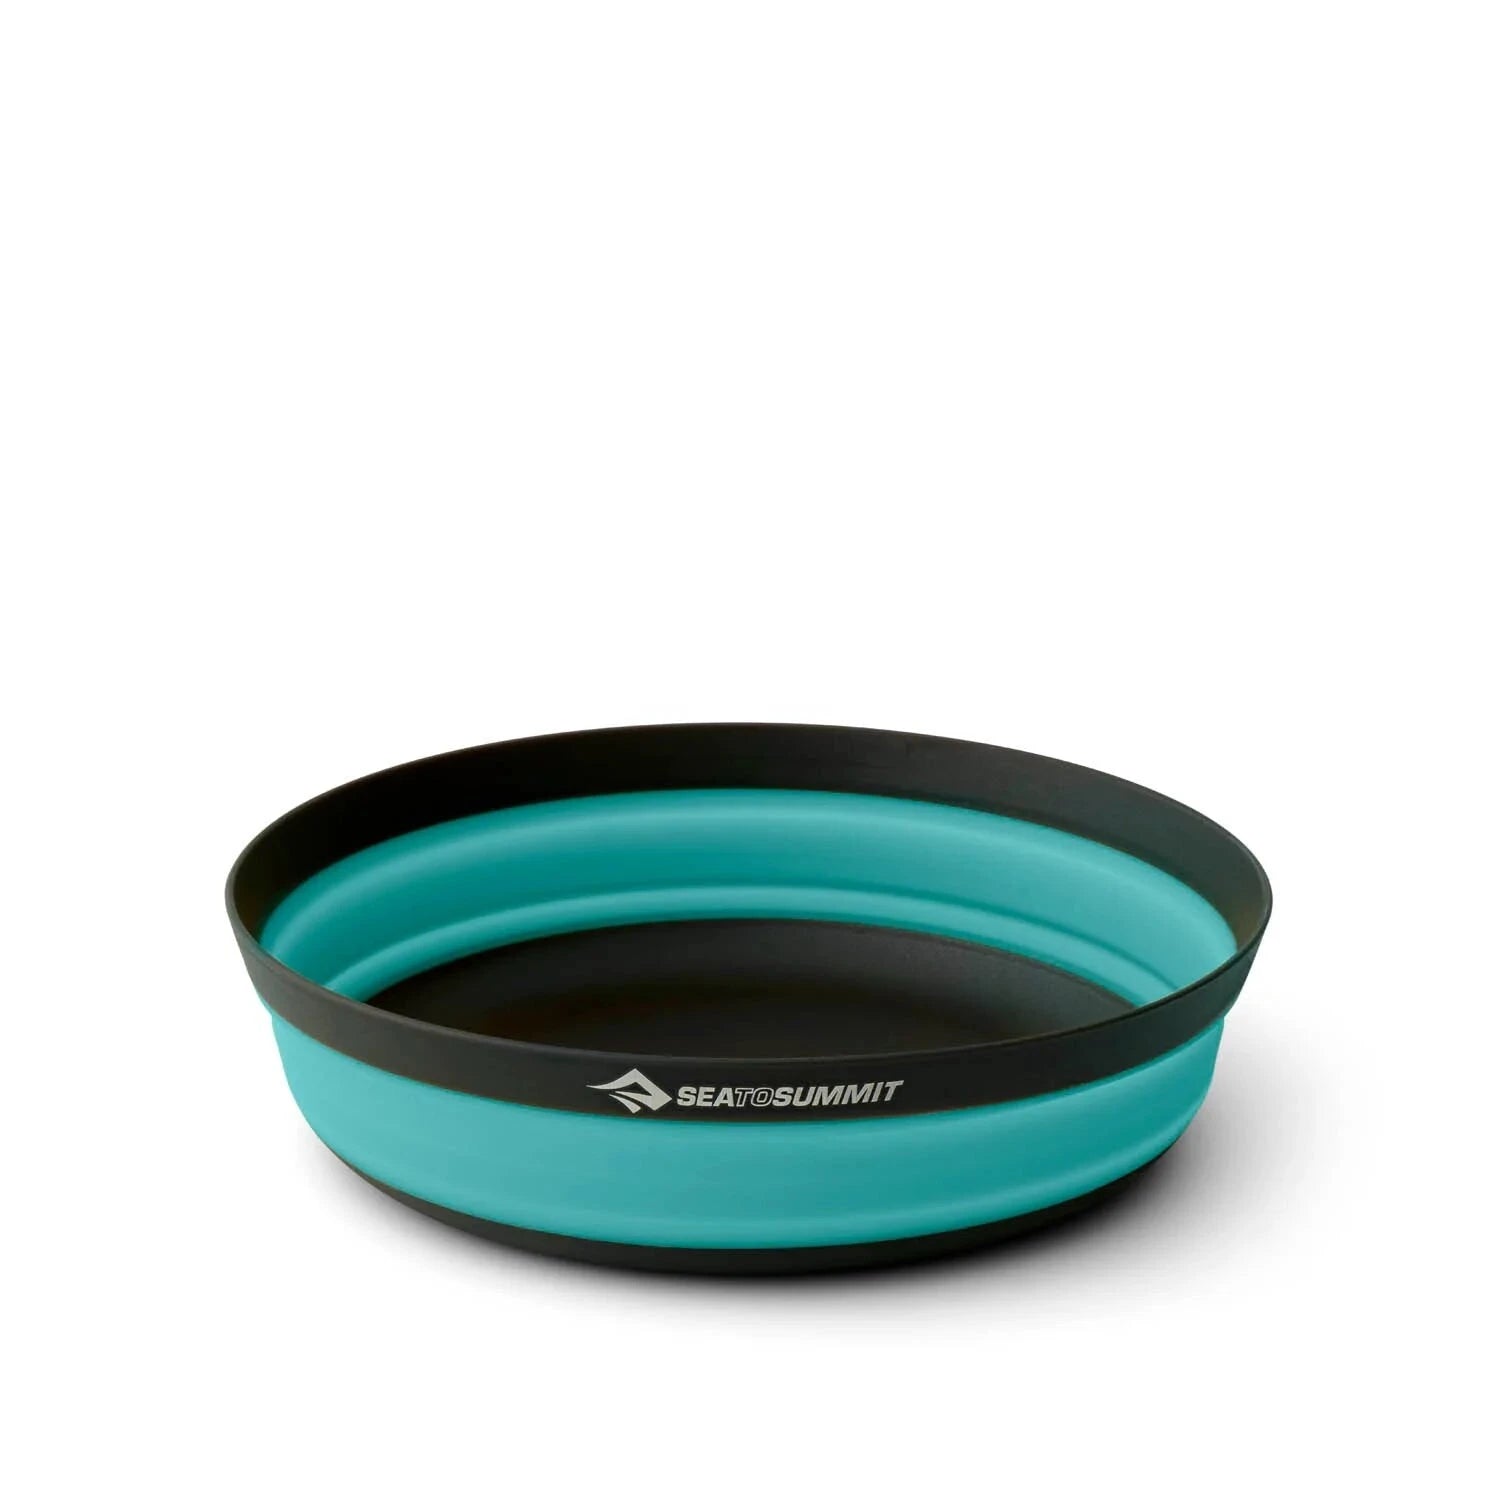 Sea to Summit Frontier Ultralight Collapsible Bowl large aqua sea blue